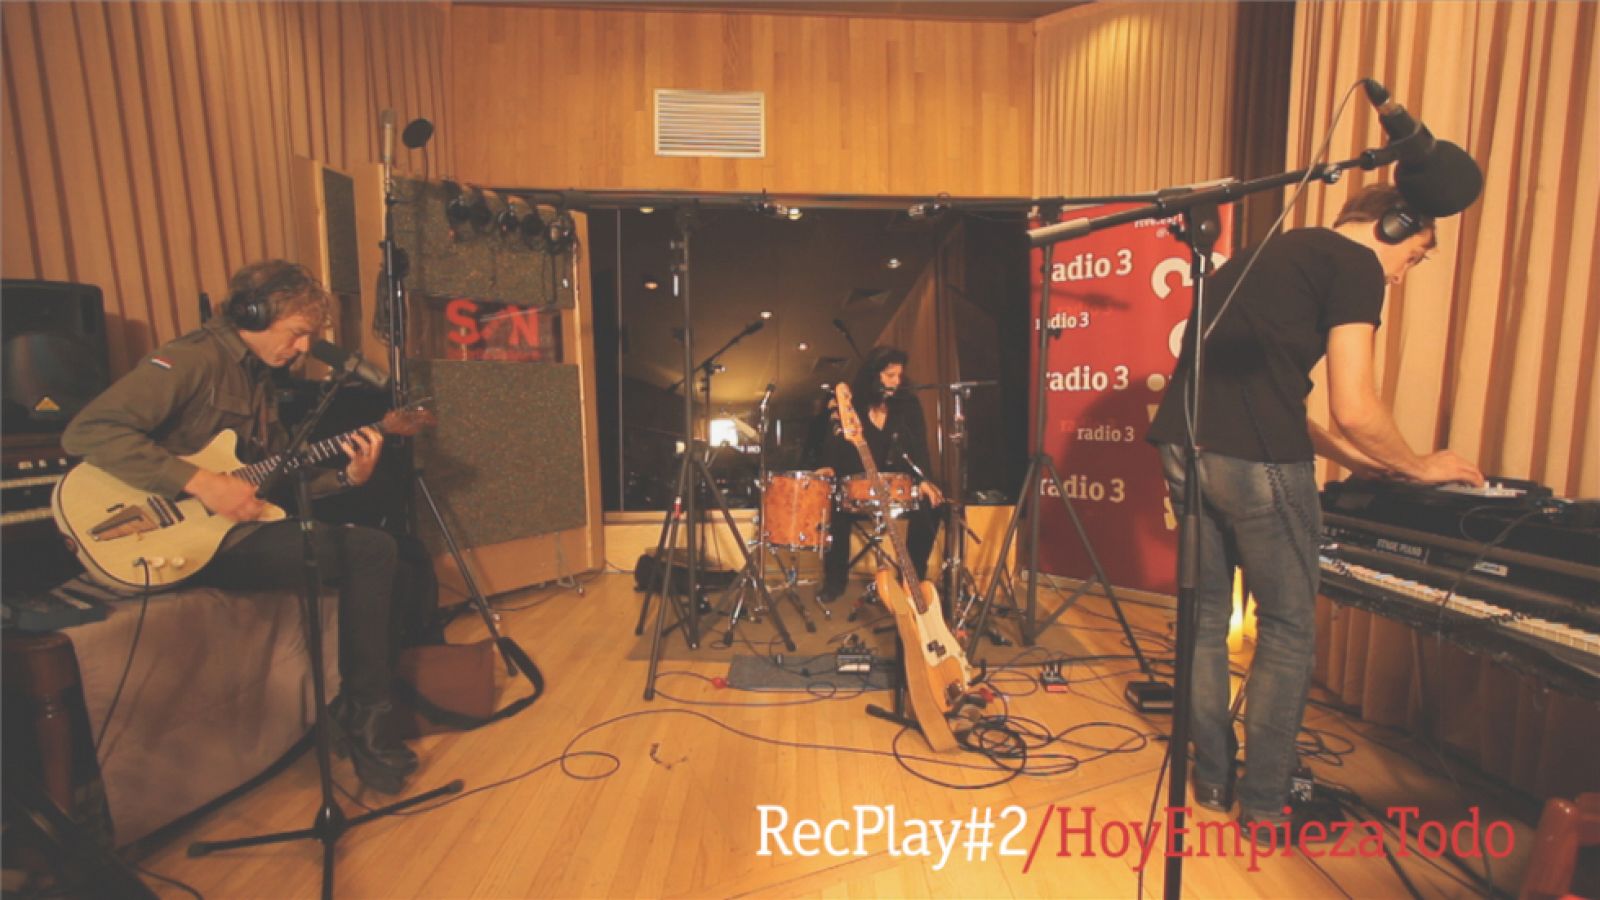 REC-PLAY #2 - Low: "Let's stay together" - 04/11/15